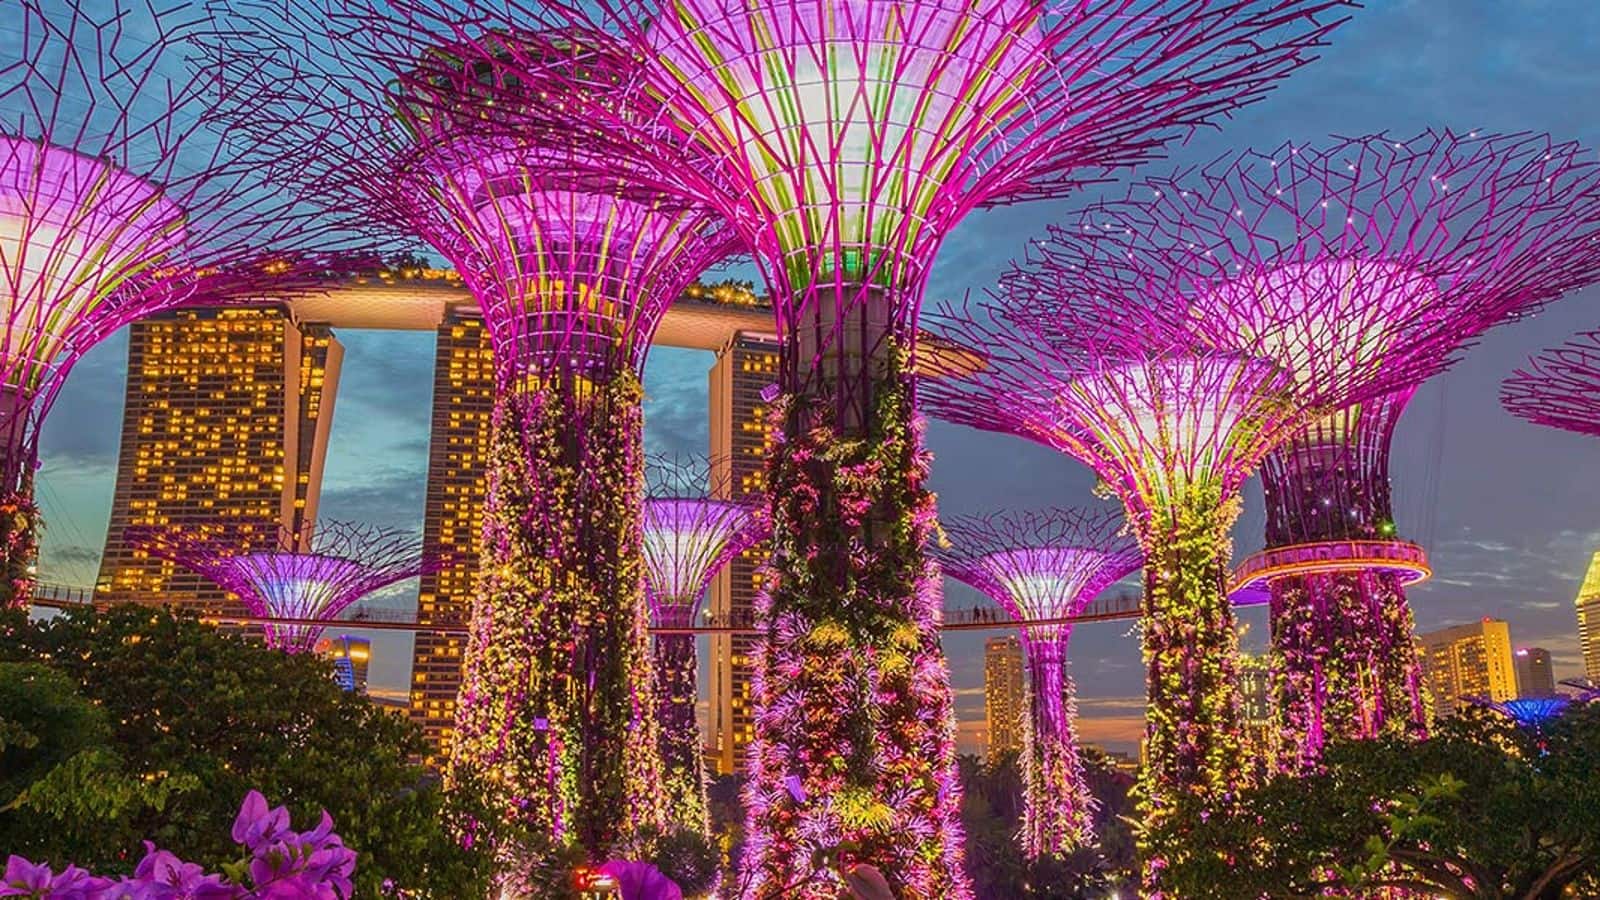 Exploring Singapore's green haven called Gardens by the Bay